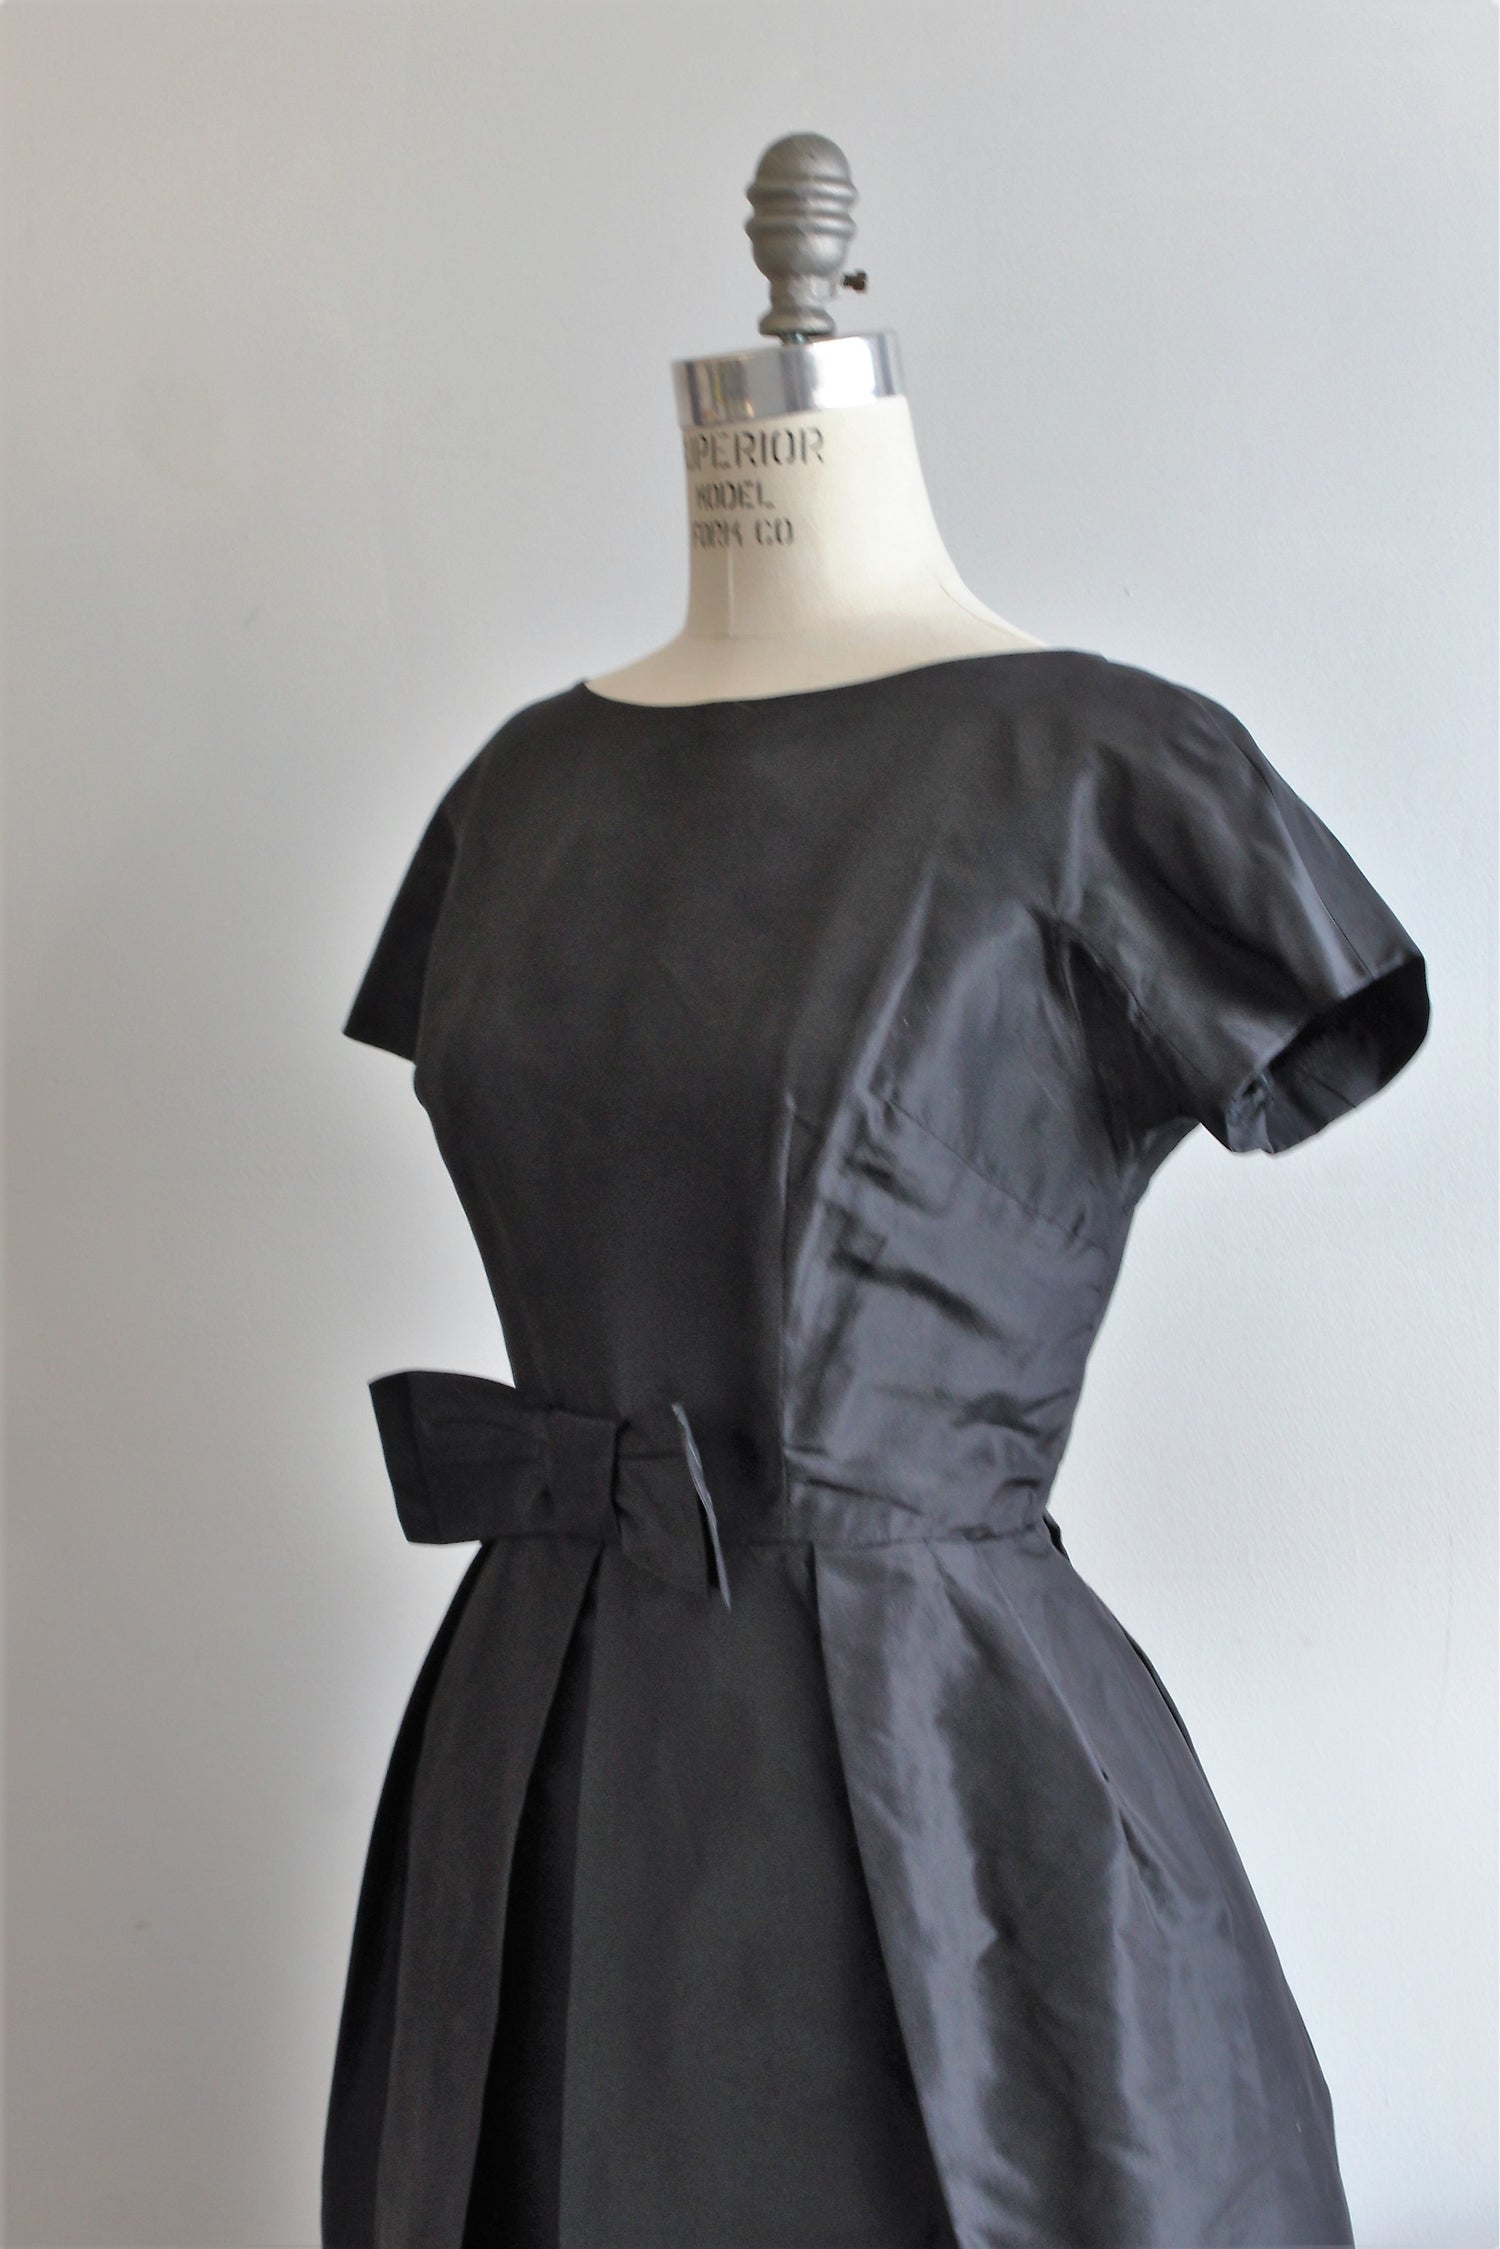 Vintage 1960s Black dress, by Petite Couture Miss Bergdorf, Designed in Paris